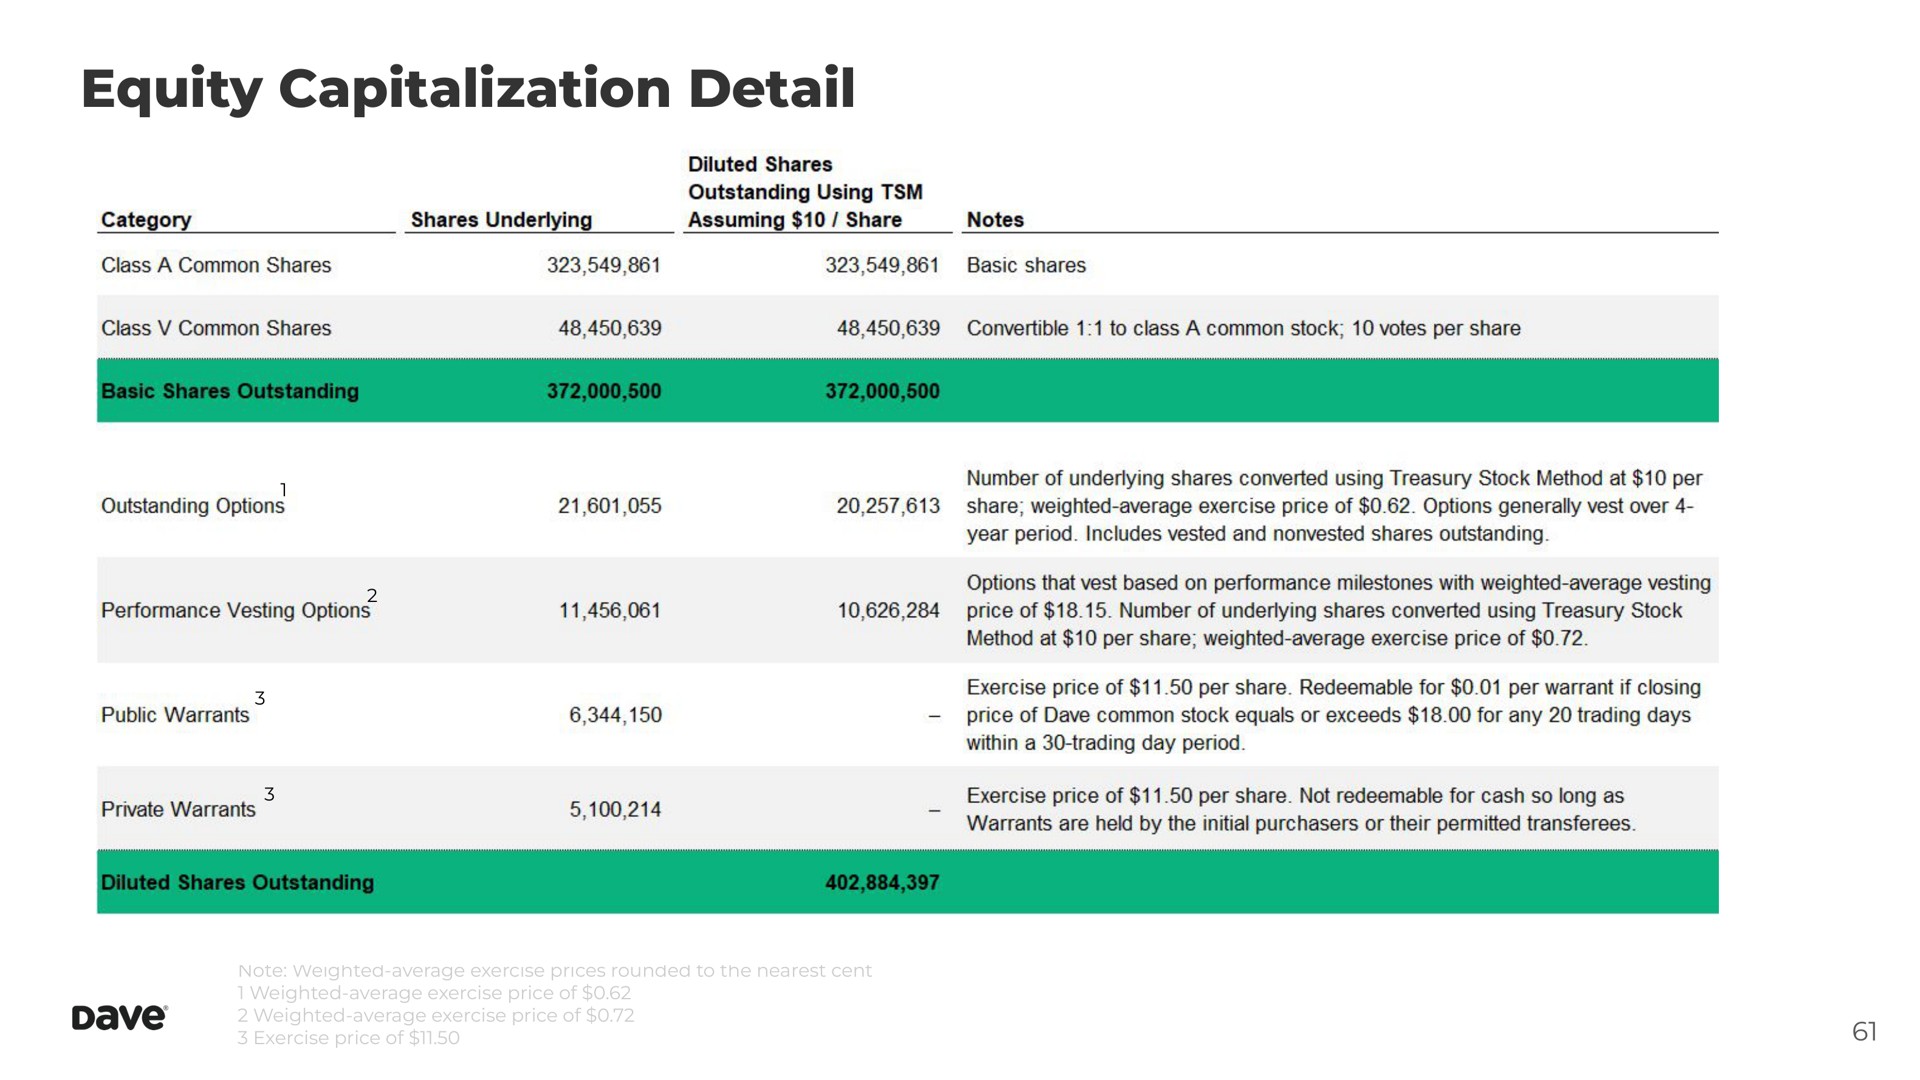 equity capitalization detail | Dave